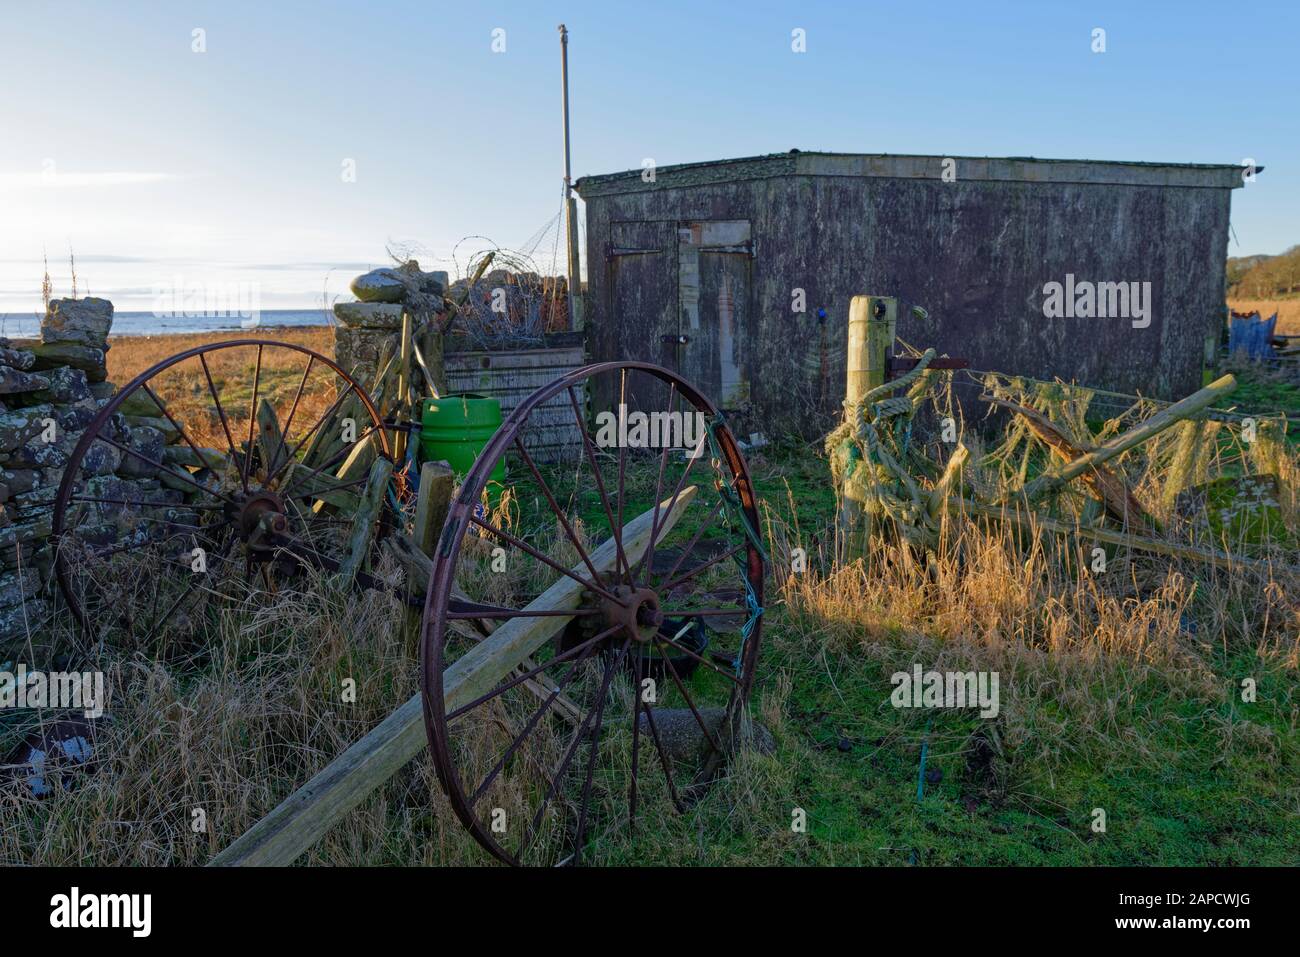 A pair of old metal rusting carriage wheels seen parked behind a stone wall next to a small Farm Hut in disrepair in a field off the Coastal path. Stock Photo